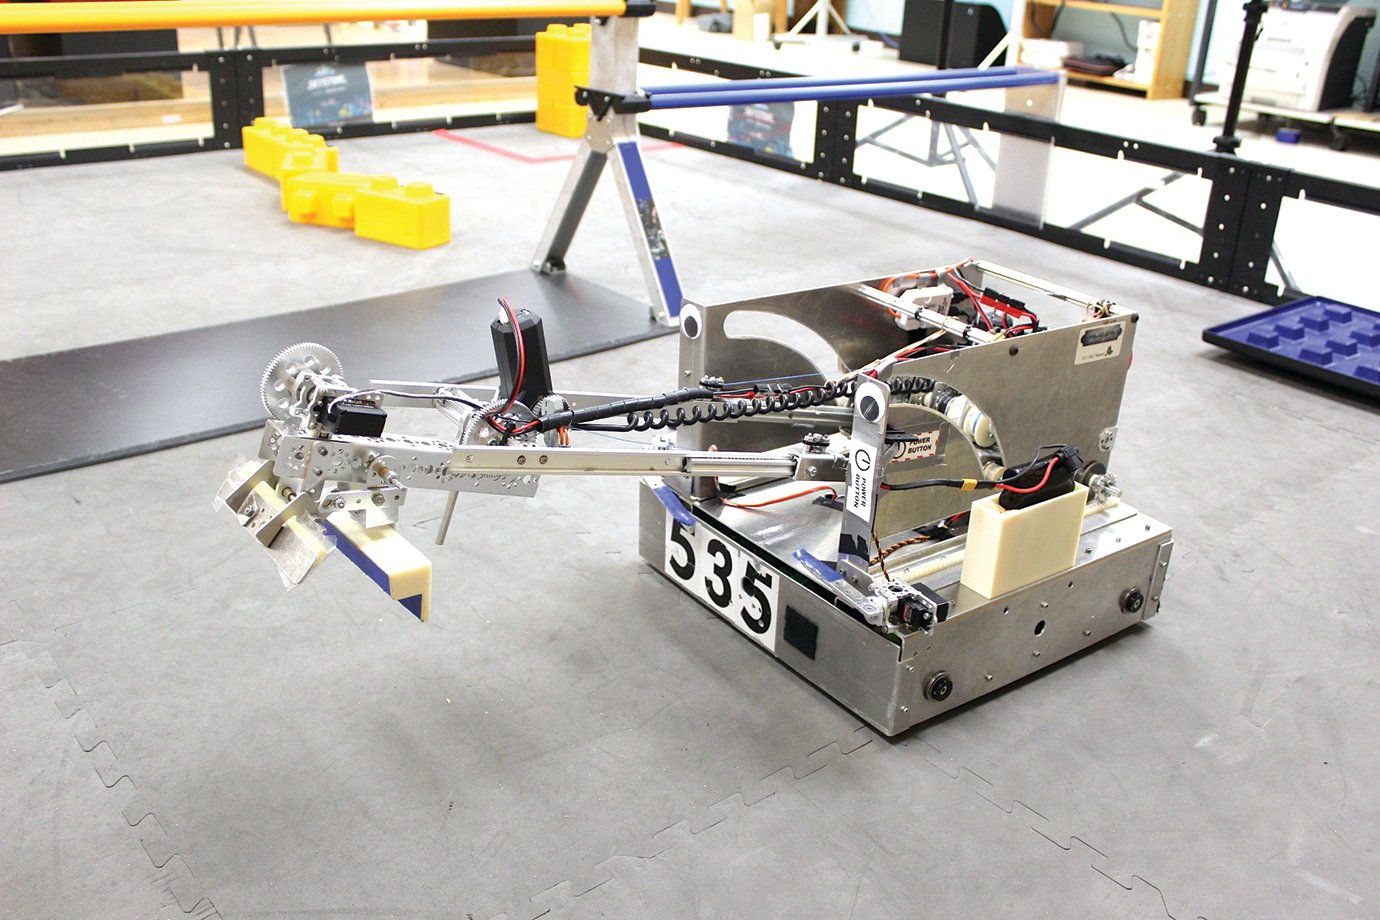 The TOBOR robotics team at Crawfordsville High School have put together a complex, mobile piece of machinery, seen here in what members call the "field" where they can put their designs into practice.